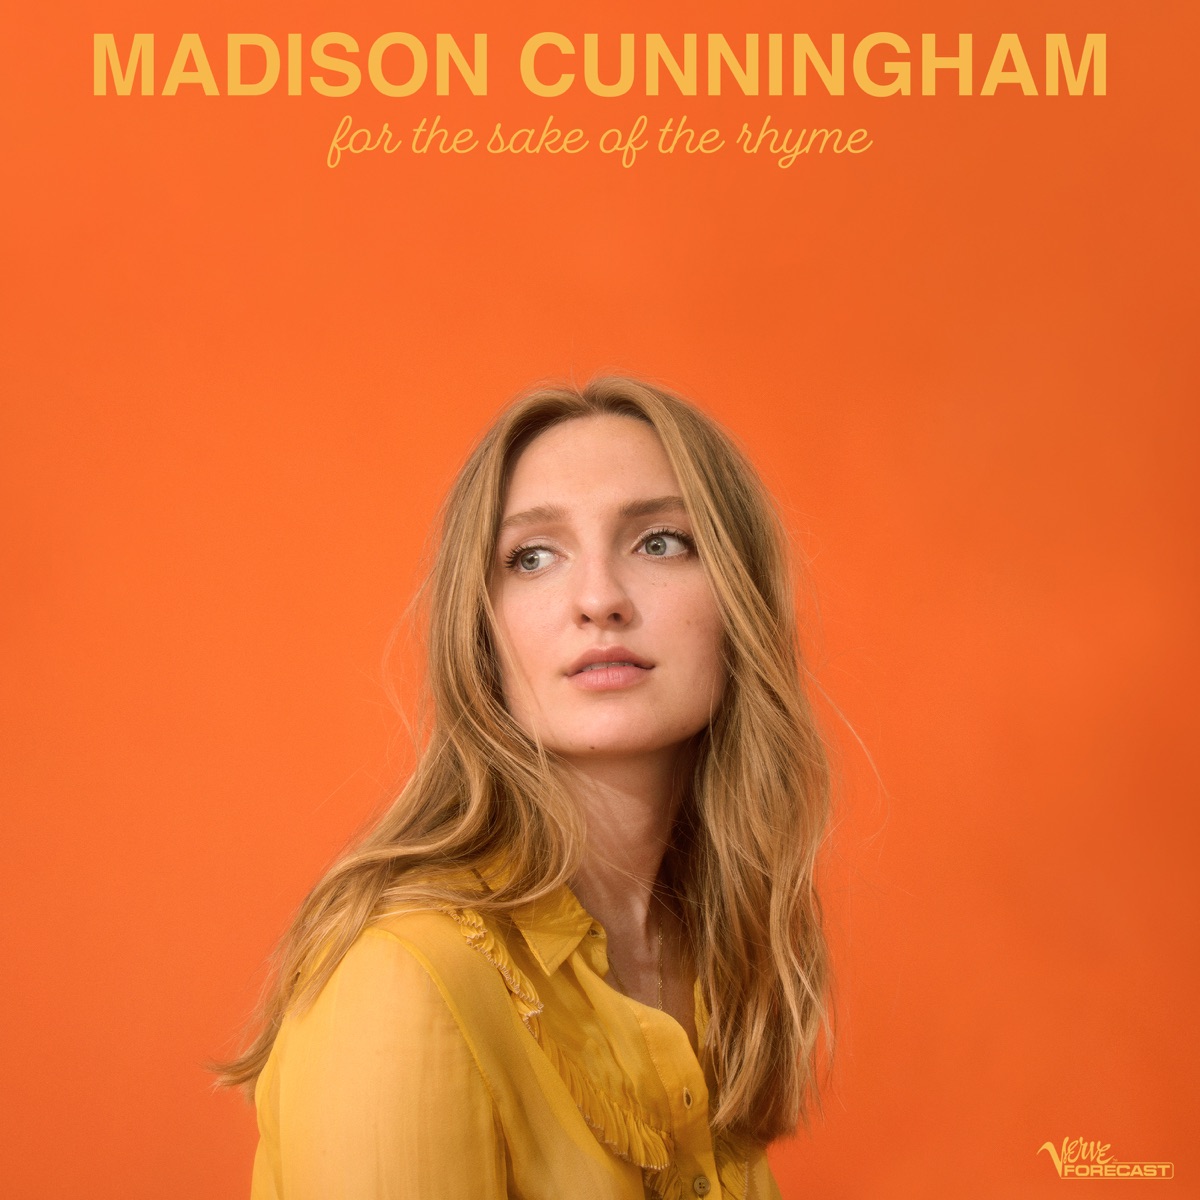 Who Are You Now - Album by Madison Cunningham - Apple Music